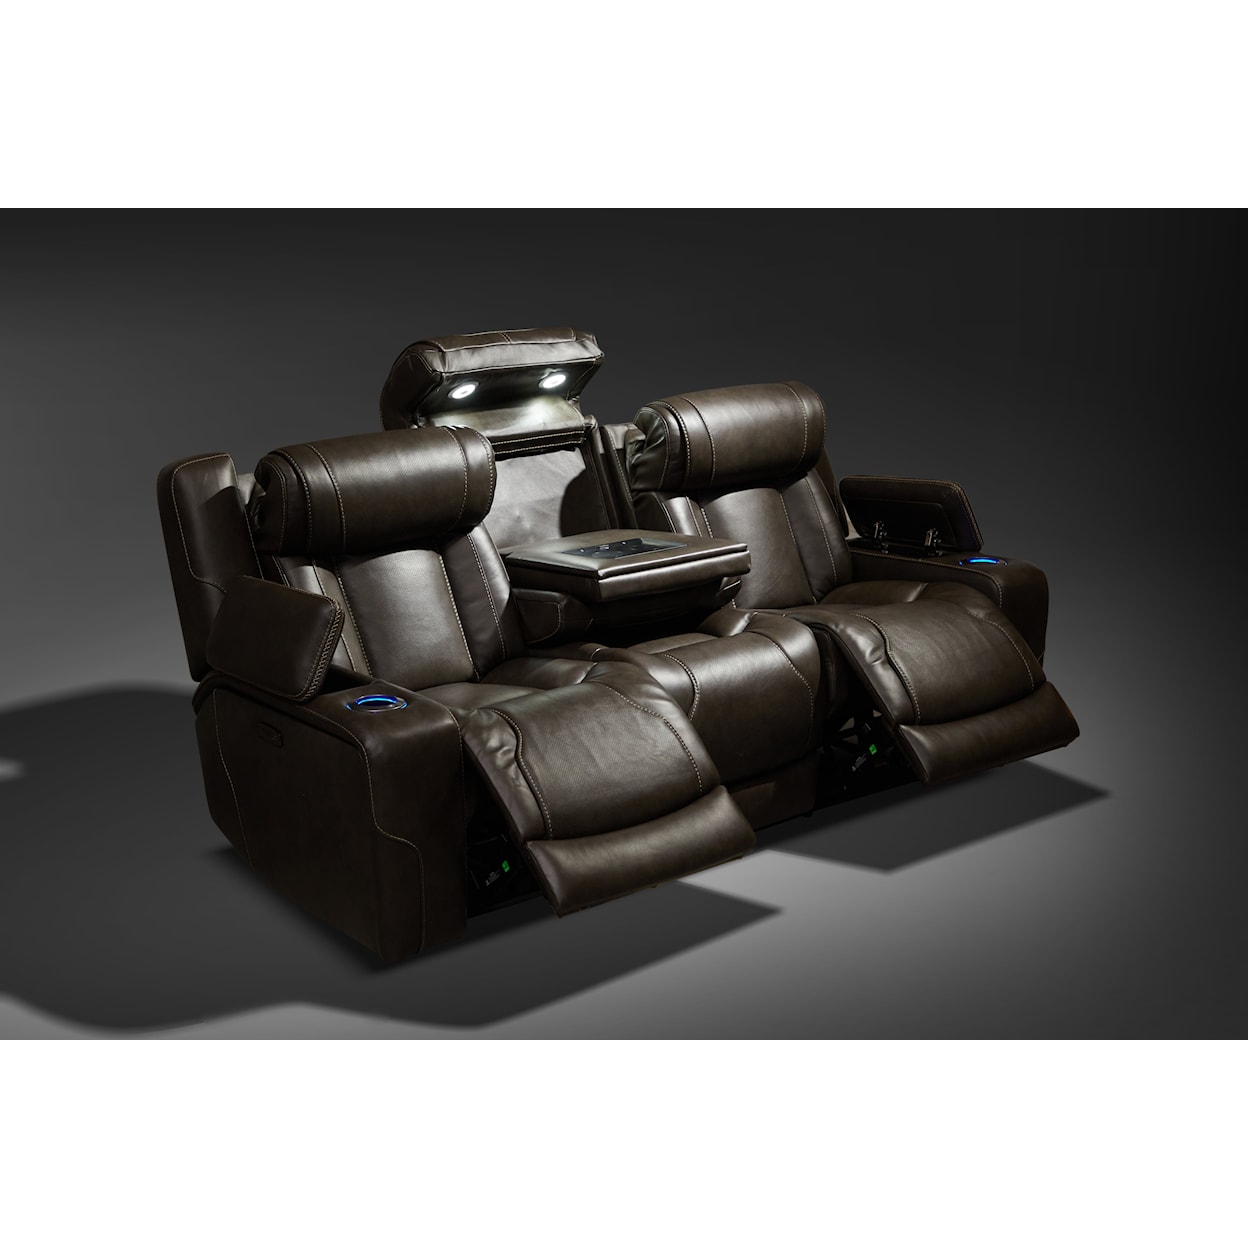 Kuka Home 615 Transformer Leather Collection 6153 Charcoal Leather Dual Power Sofa